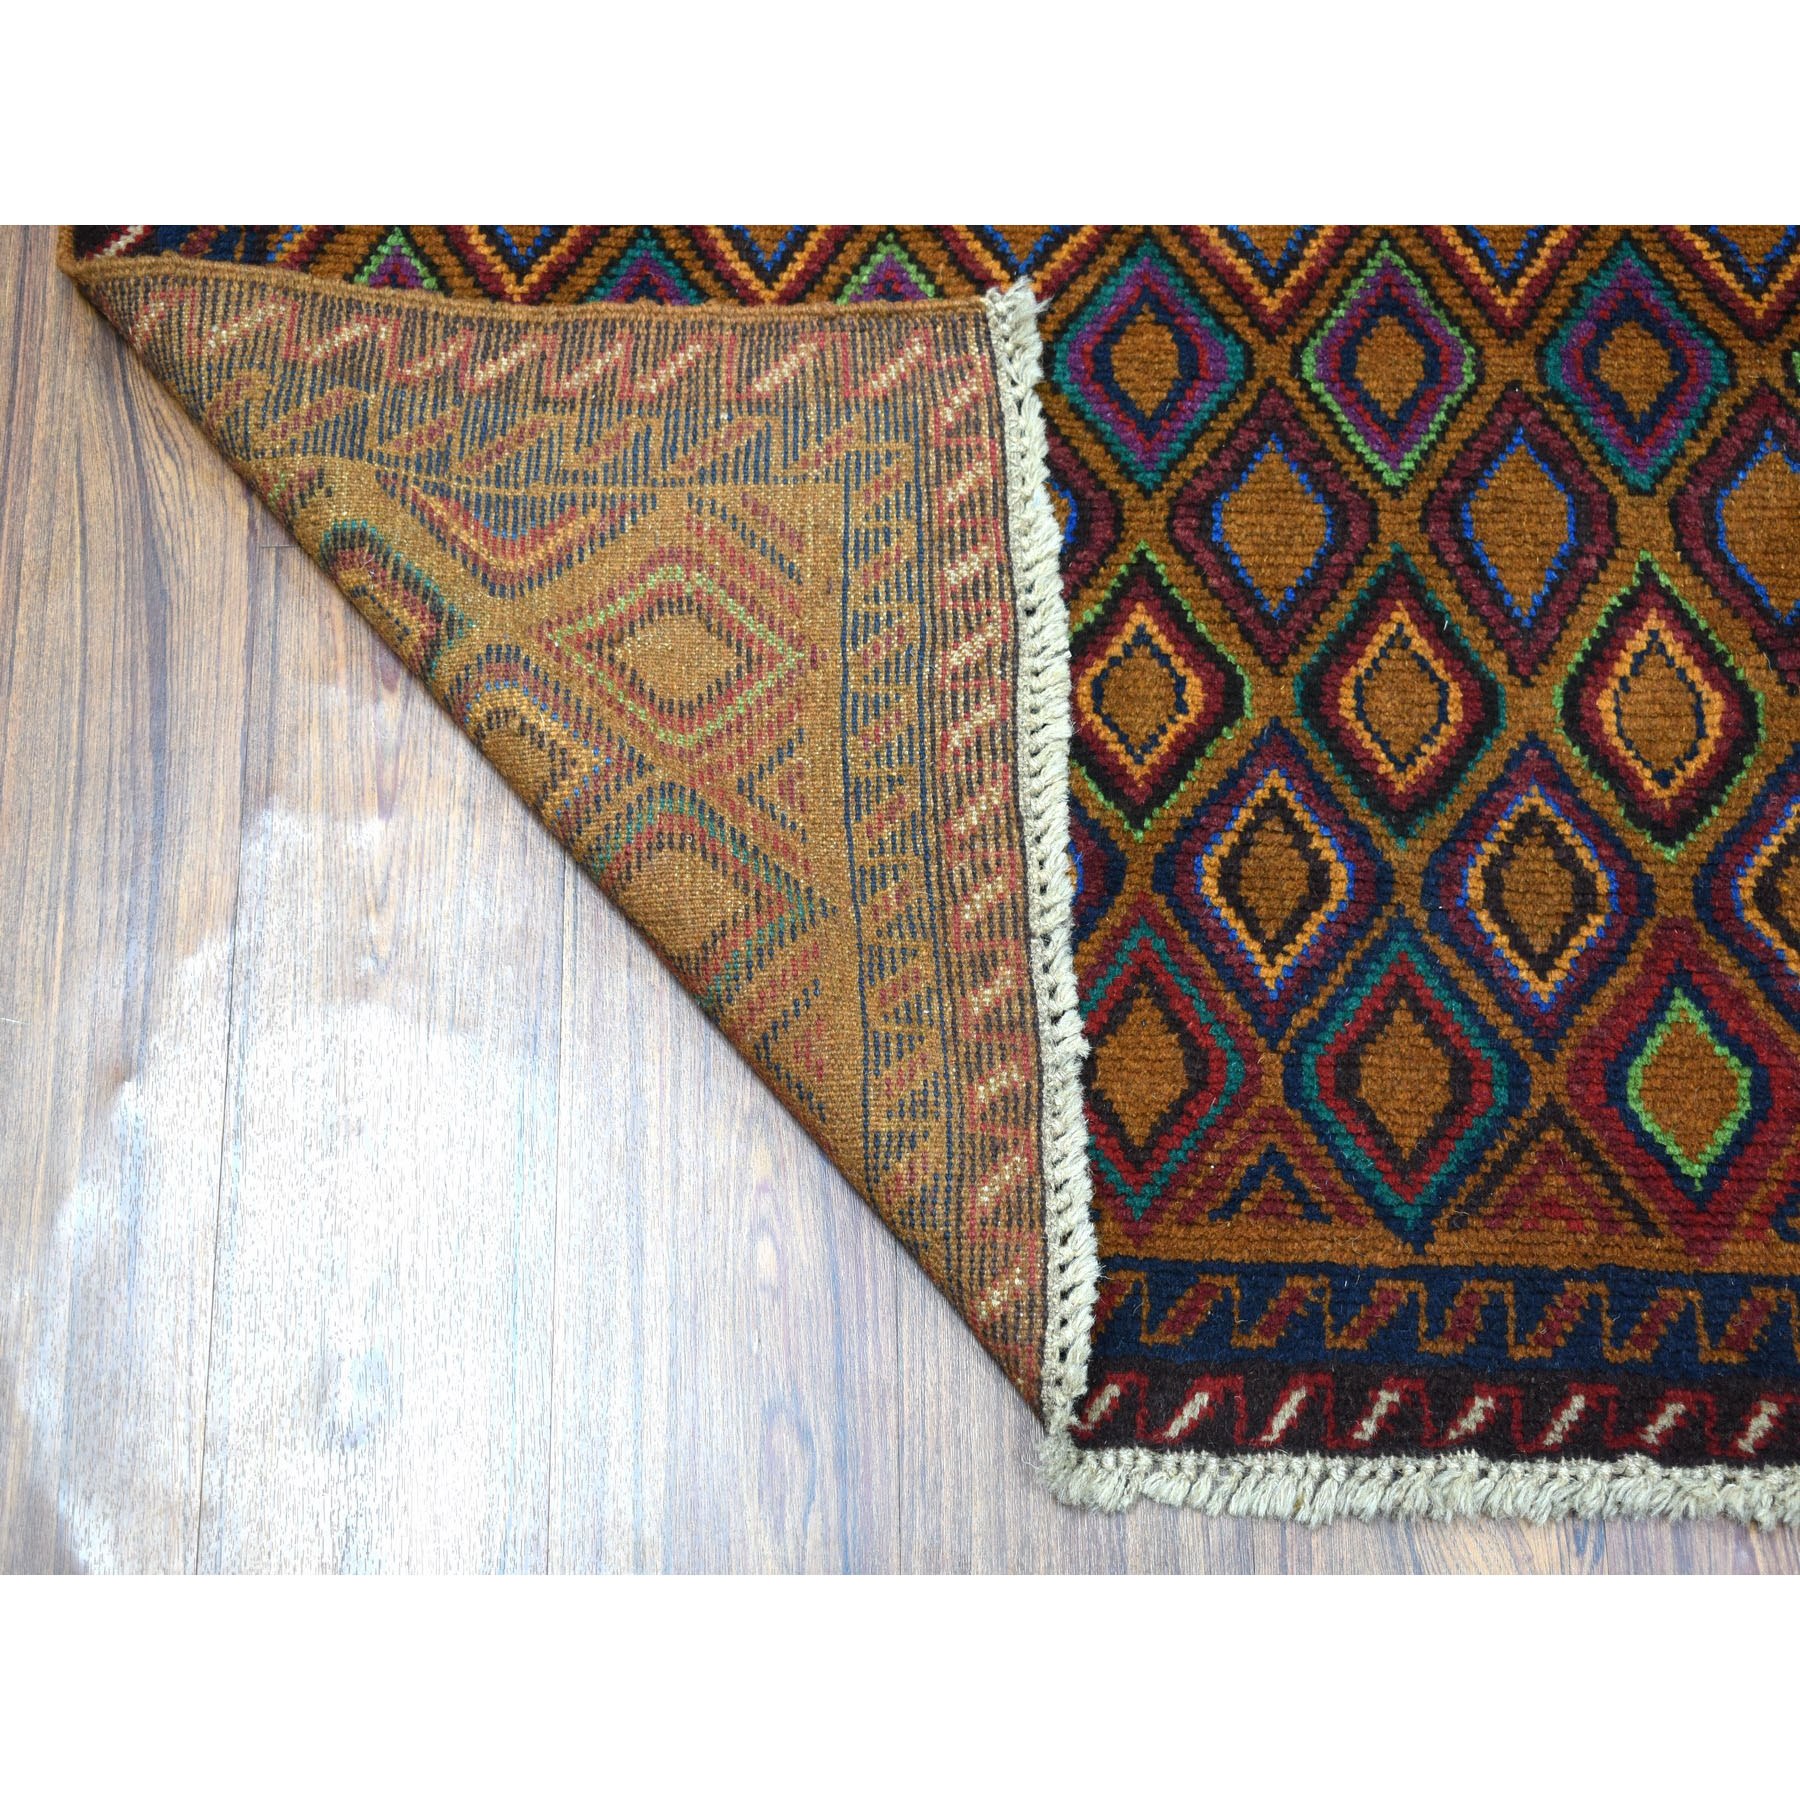 4'3"x6'2" Brown Tribal Design Colorful Afghan Baluch Pure Wool Hand Woven Oriental Rug 